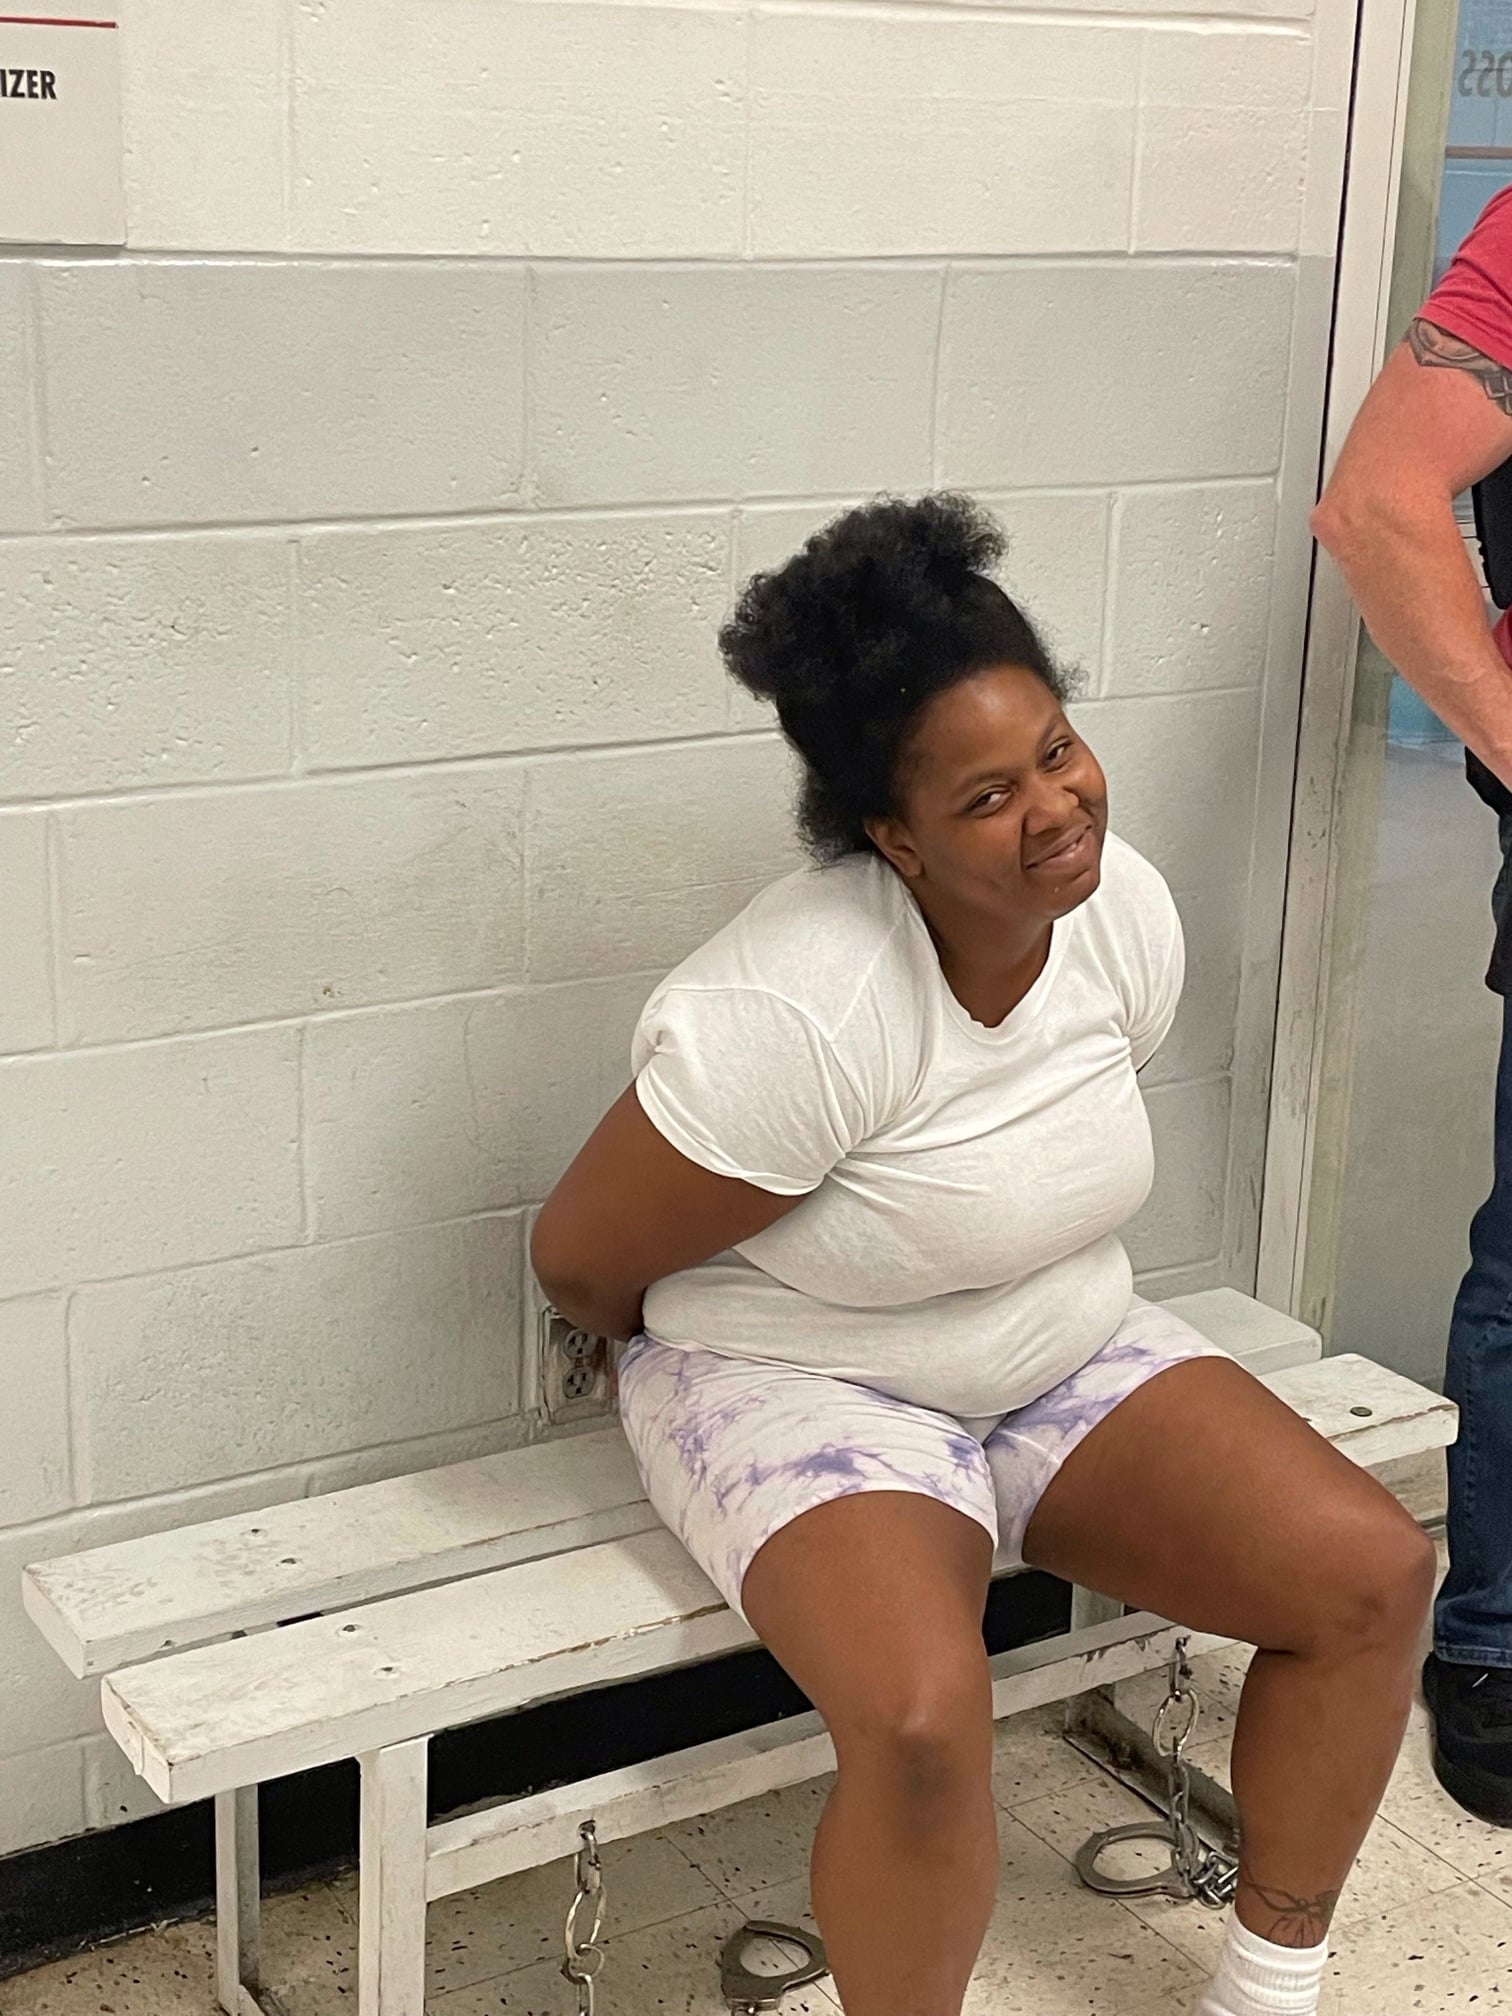 PHOTO: Lorraine Graves, who was on the run for allegedly being an accessory to a murder in March, has been arrested just a day after commenting on the Tulsa Police Department’s Facebook post on July 14, 2021 asking about reward money for her arrest.